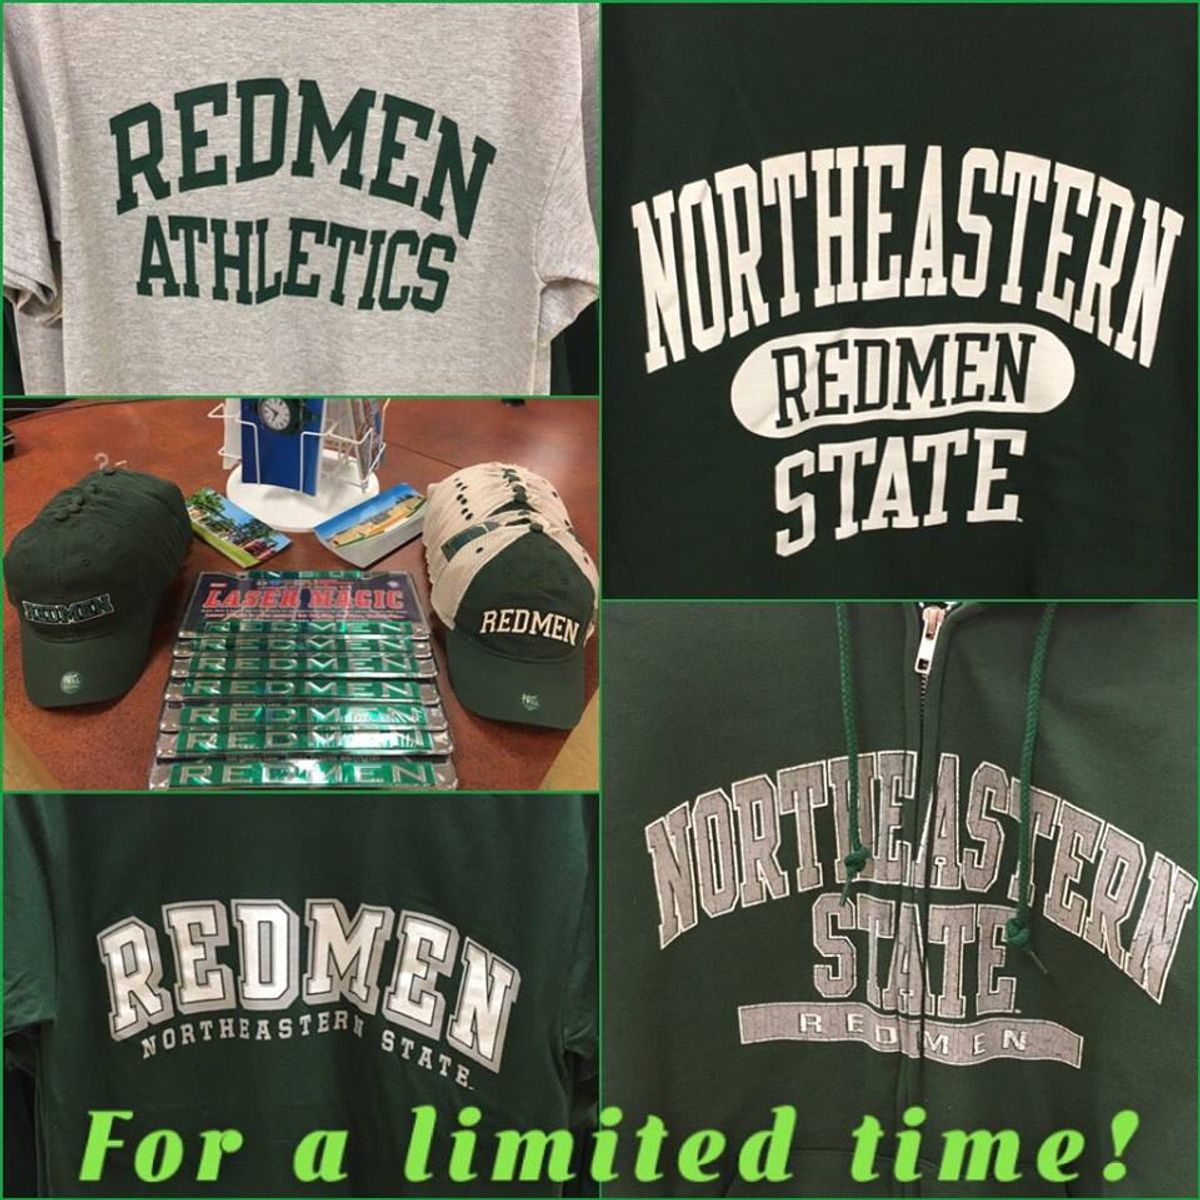 Is The NSU Redmen Controversy Offensive?